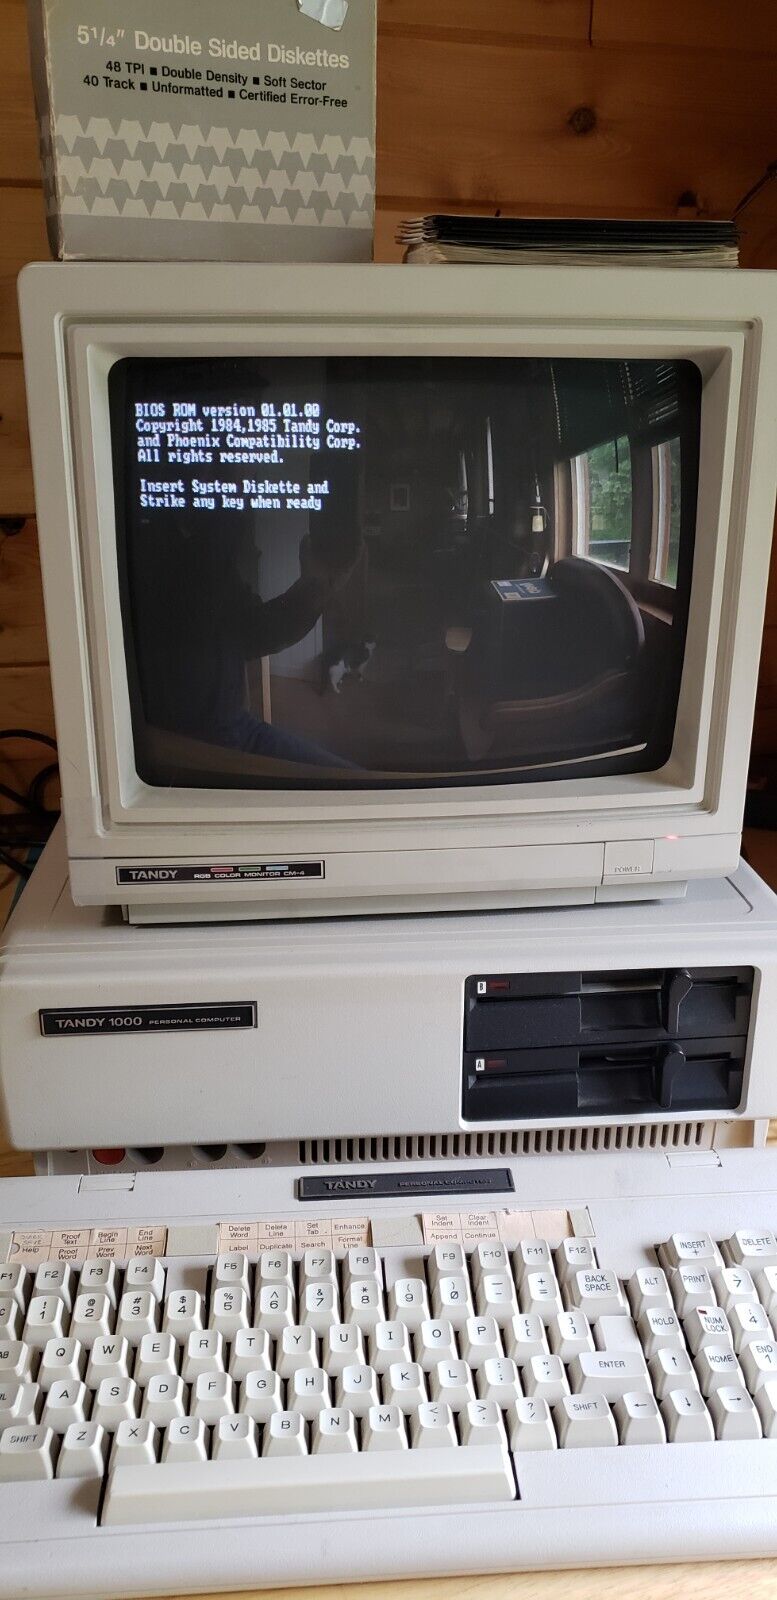 TANDY CM-4 RGB COLOR MONITOR #25-1021 Reduced from $325